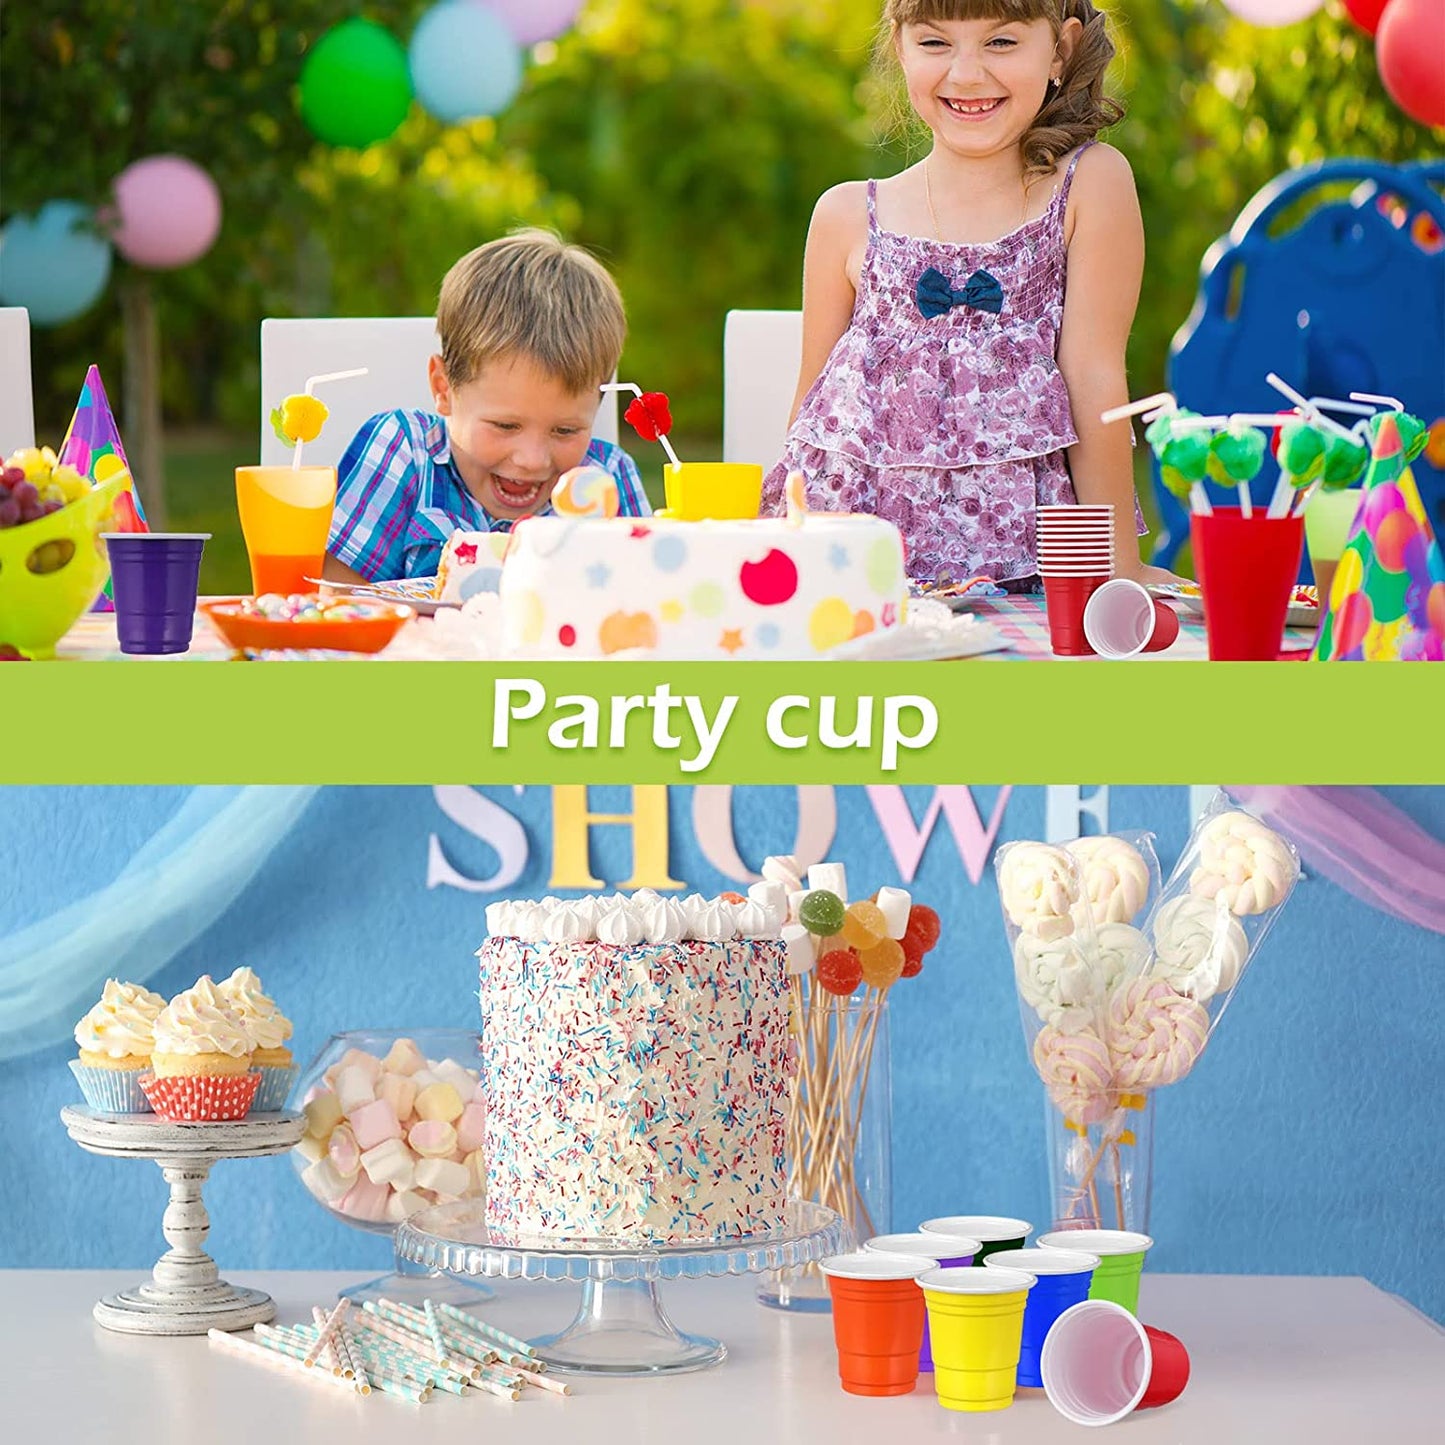 1000 Packs Plastic Shot Glasses 2Oz/ 60Ml Disposable Shot Glasses Bulk Assorted Party Shot Cup for Kids Birthday Wedding Holiday Party Restaurant Kitchen BBQ Picnic Camping Daily Life,10 Color